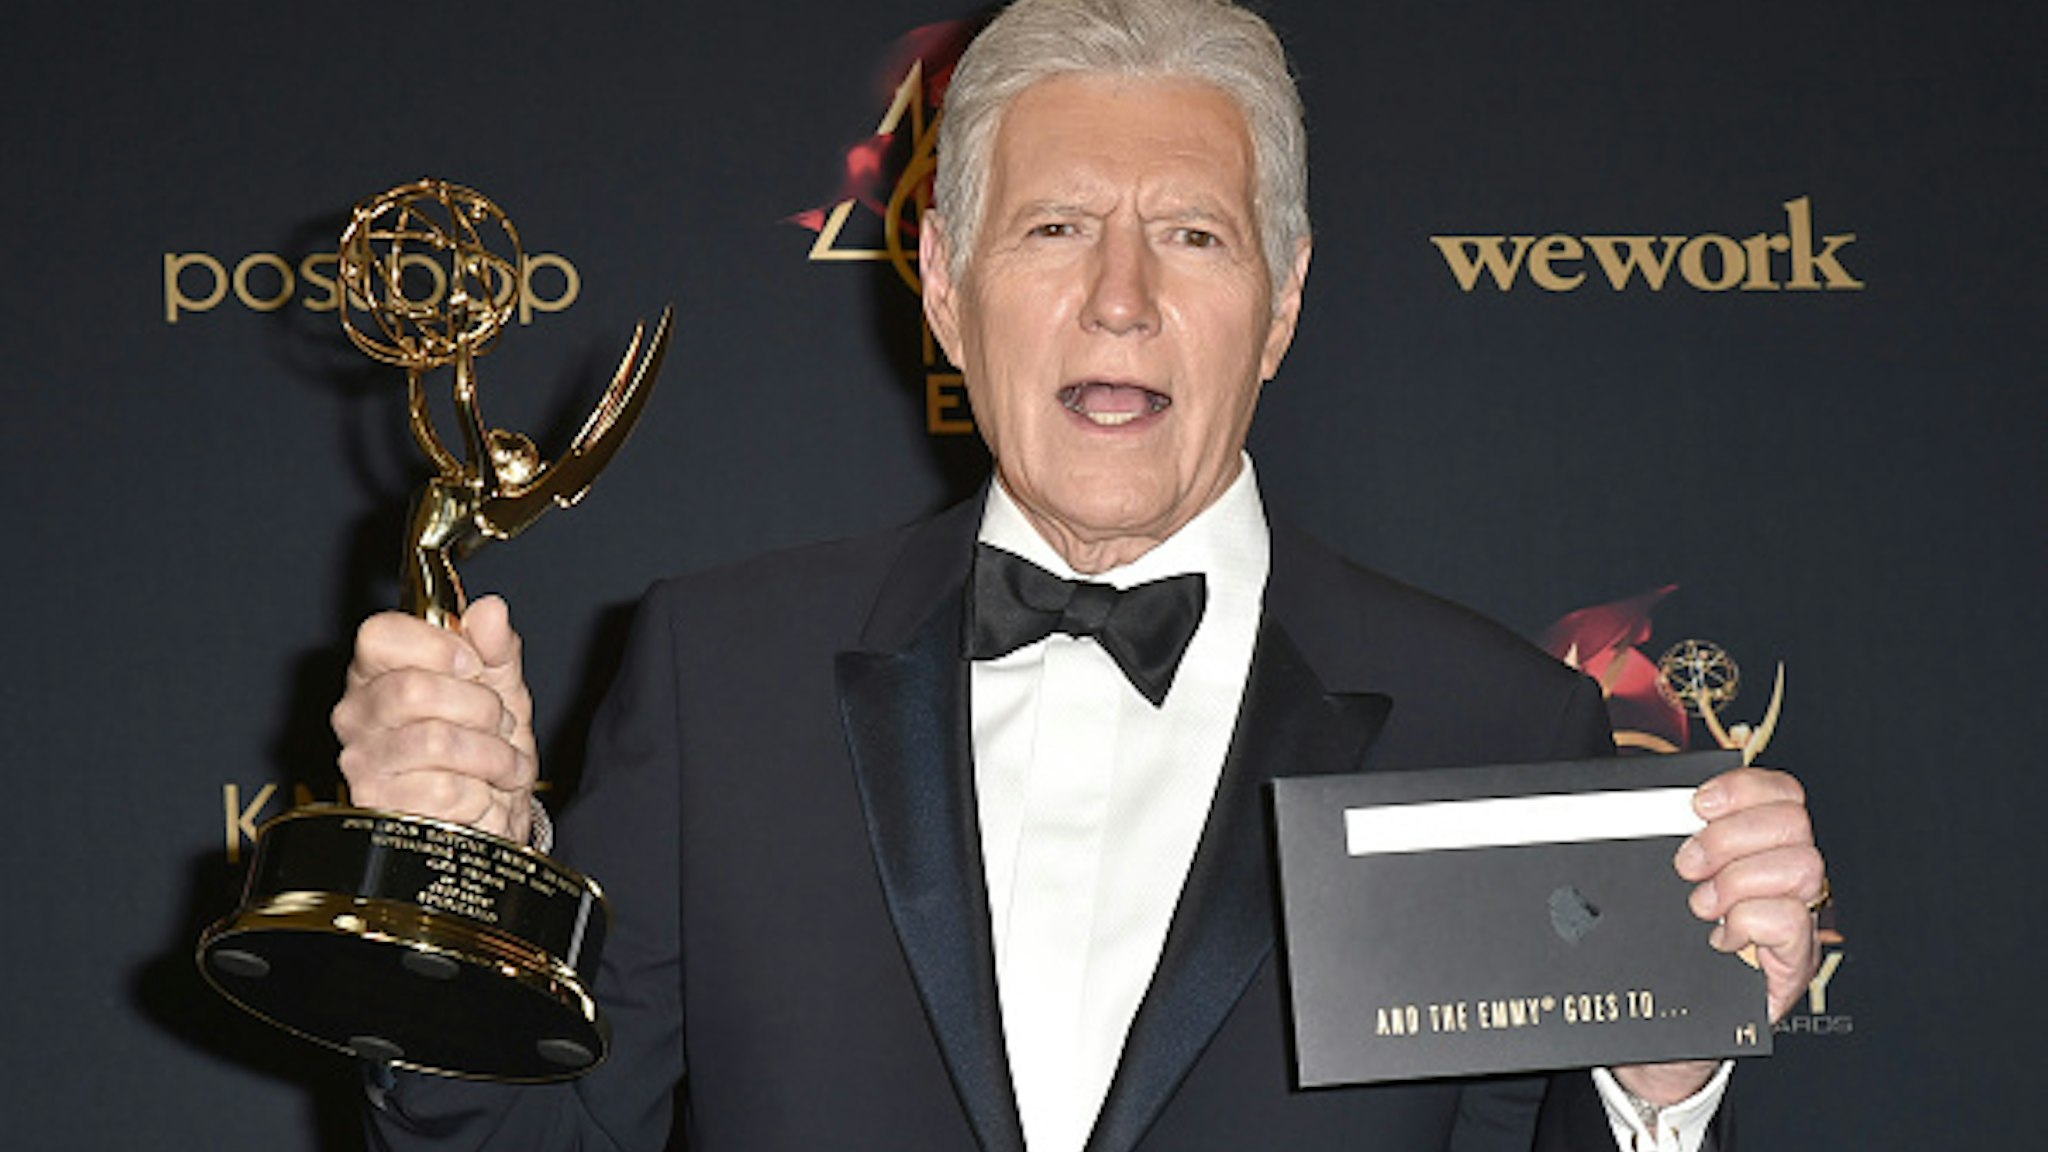 PASADENA, CALIFORNIA - MAY 05: Alex Trebek, winner of the Outstanding Game Show Host award, poses at the 46th Annual Daytime Emmy Awards - Press Room at Pasadena Civic Center on May 05, 2019 in Pasadena, California